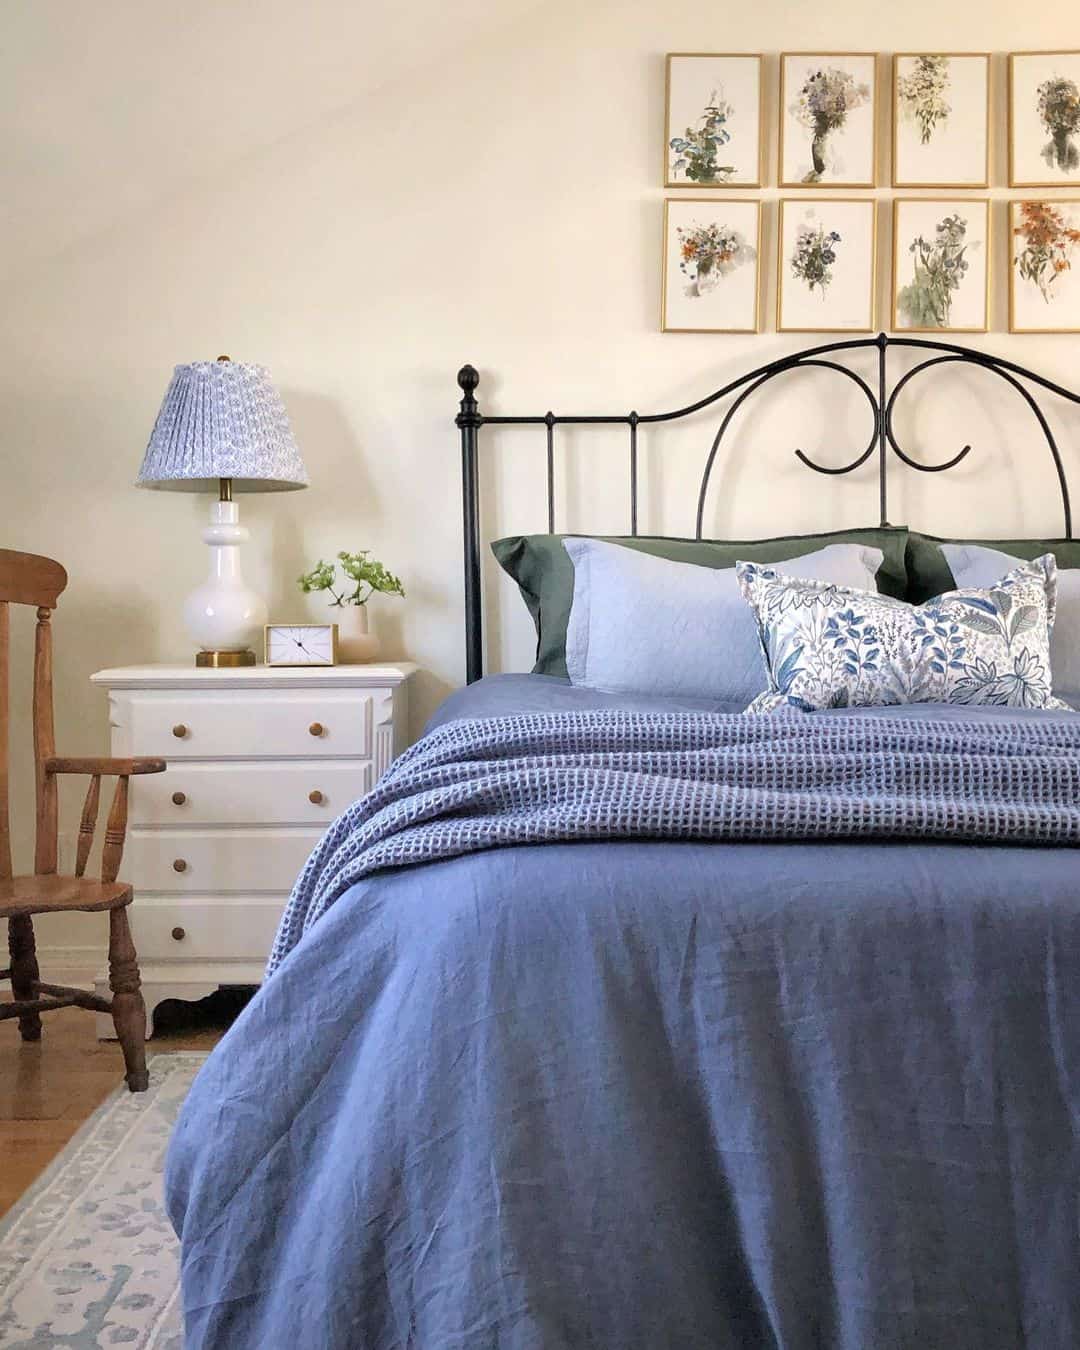 Bedroom Decor with Artistic Flair and Blue Accents